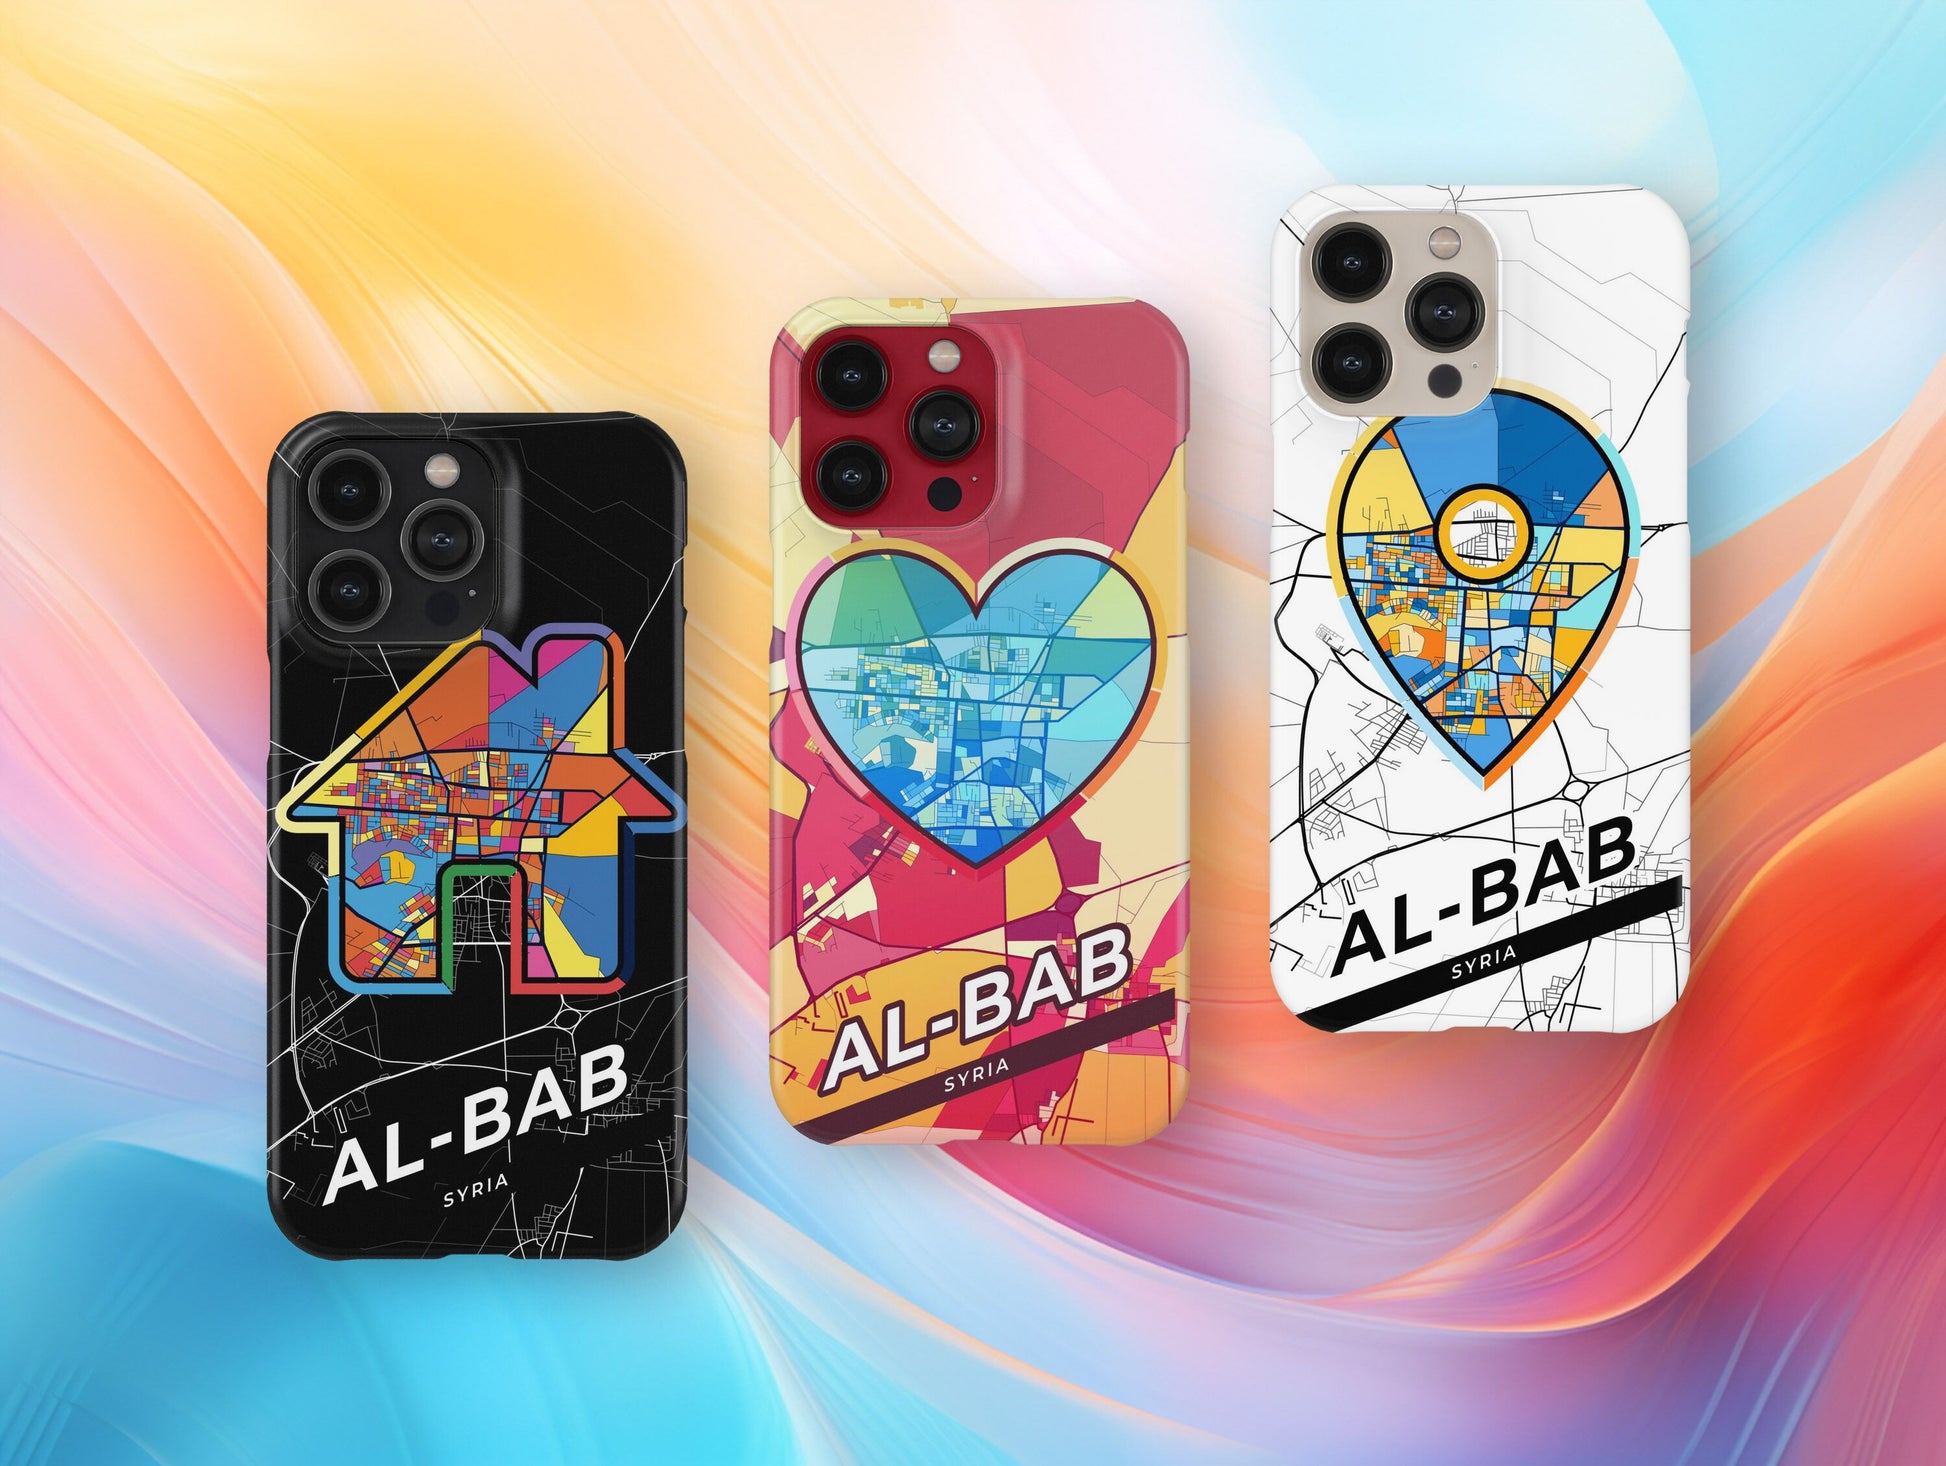 Al-Bab Syria slim phone case with colorful icon. Birthday, wedding or housewarming gift. Couple match cases.